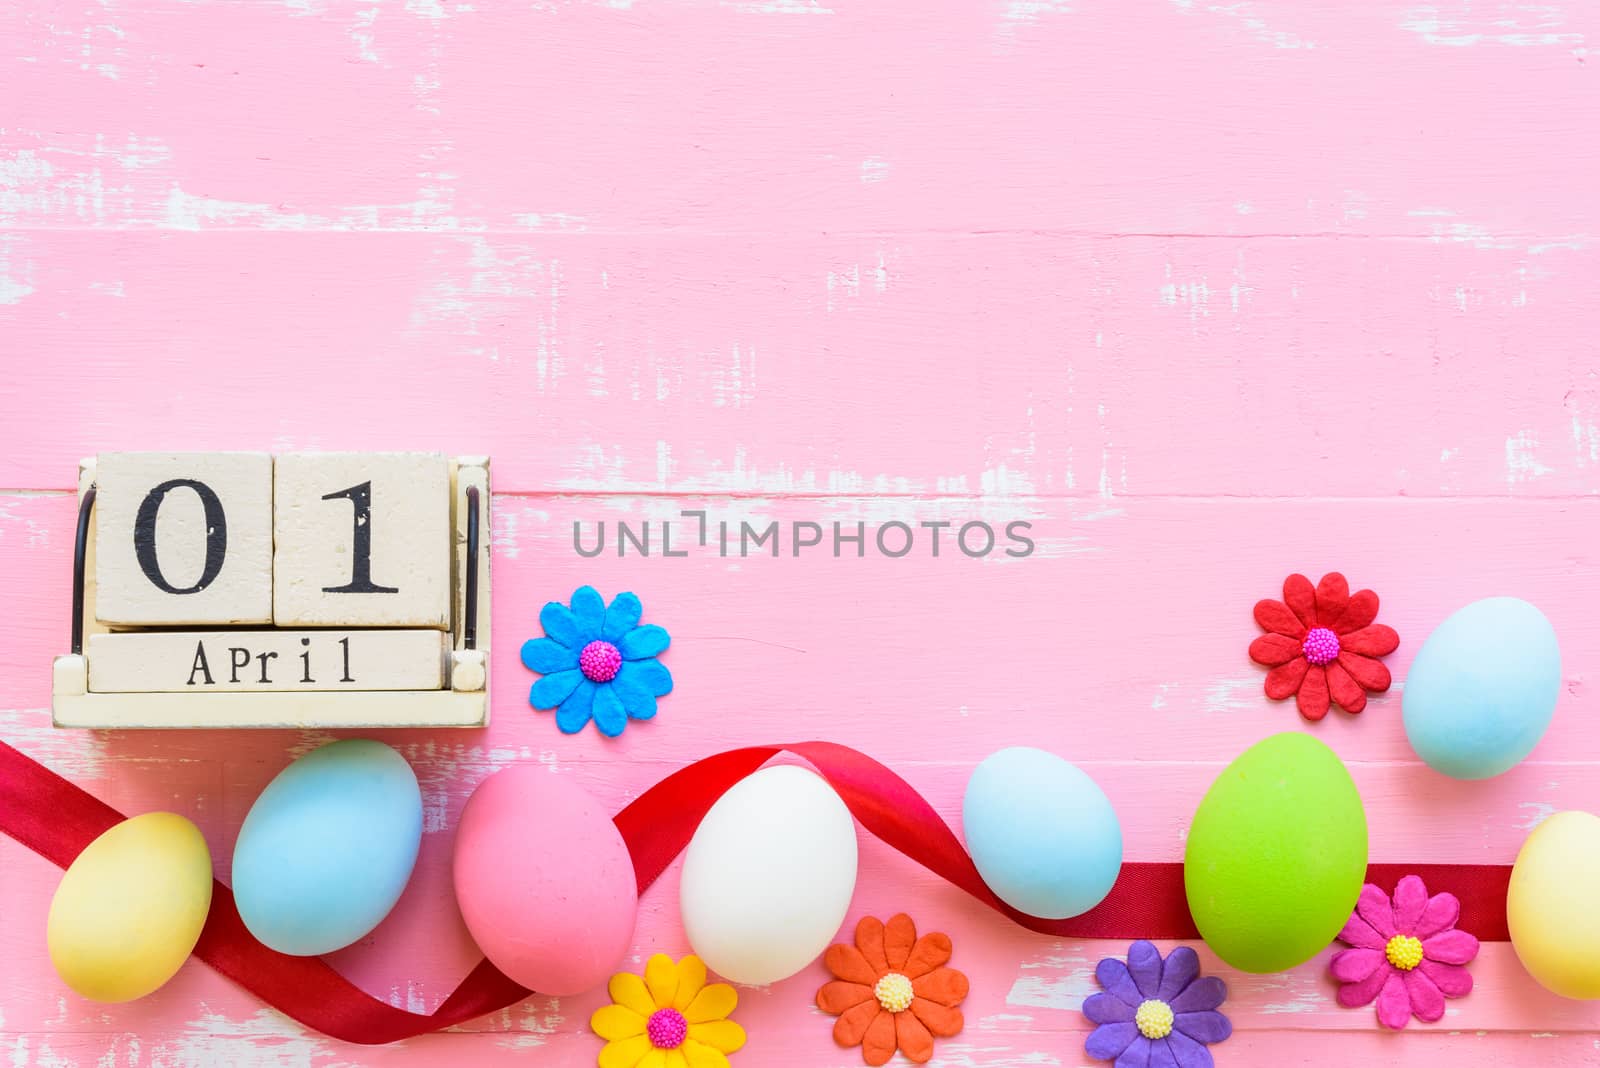 Block wooden calendar for Easter Day, April 1. Row Easter eggs with colorful paper flowers and red ribbon on bright pink and white wooden background.